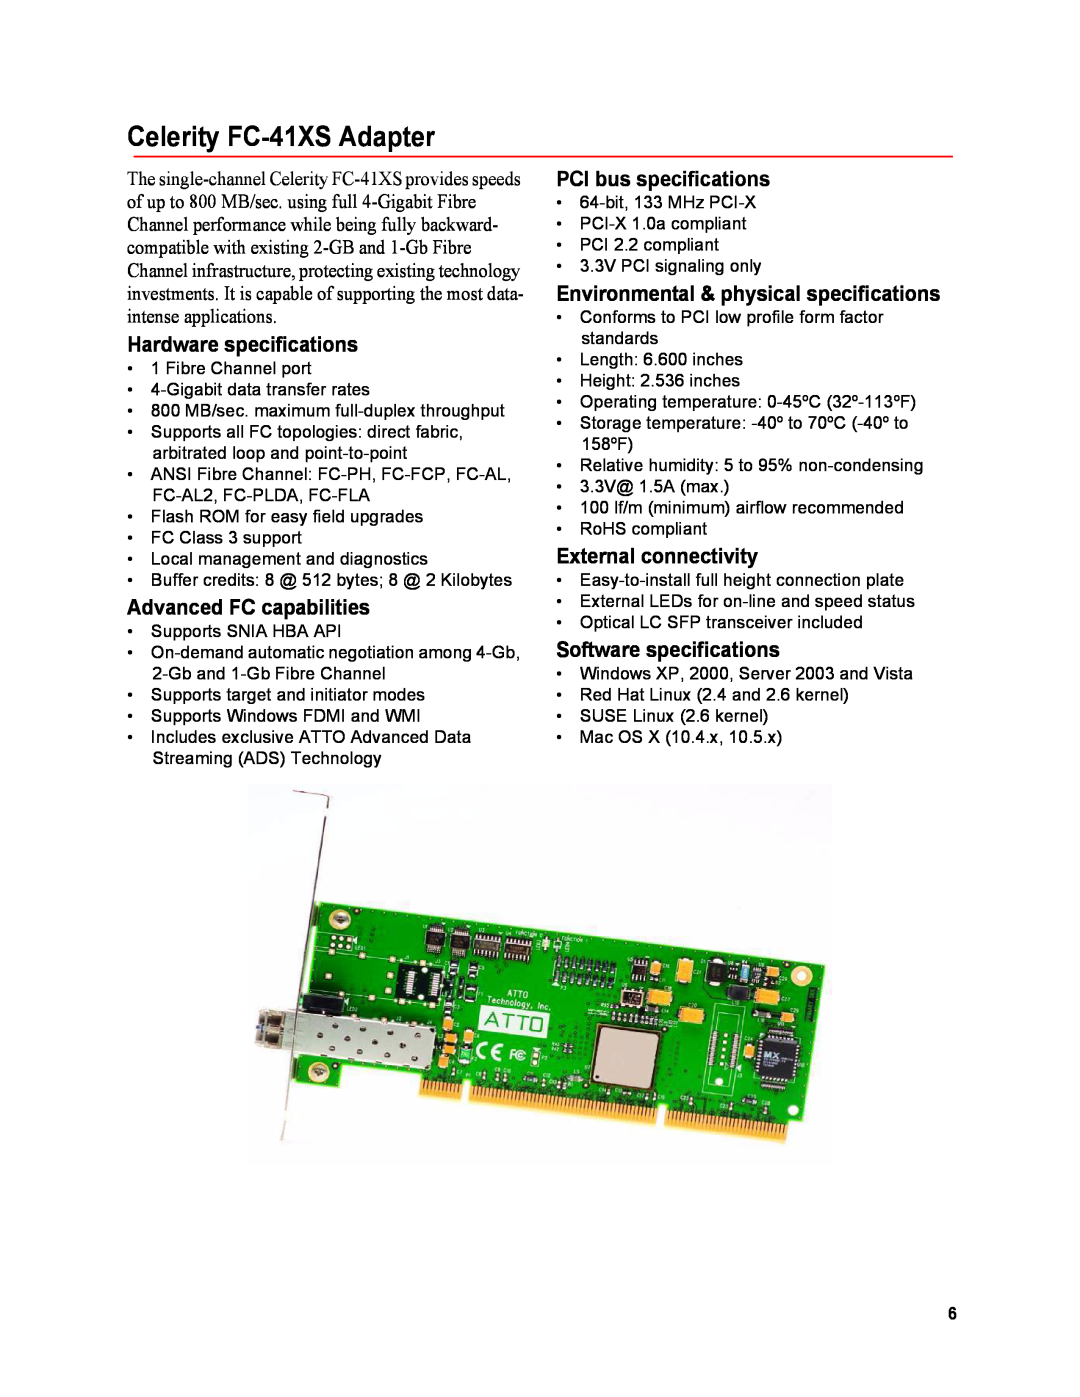 ATTO Technology FC-41ES Celerity FC-41XS Adapter, Hardware specifications, Advanced FC capabilities, External connectivity 